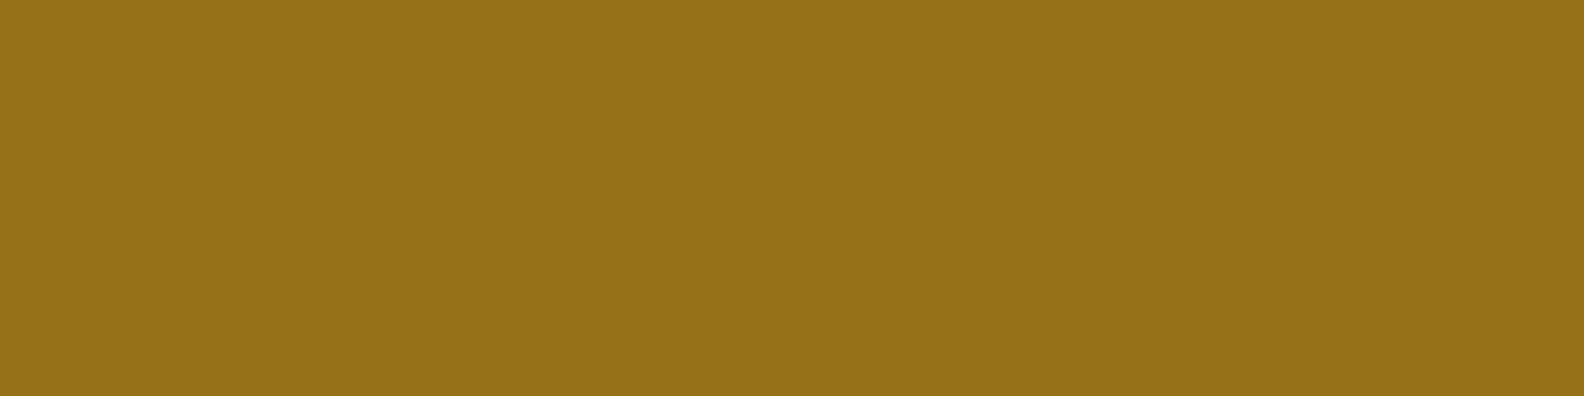 1584x396 Sandy Taupe Solid Color Background